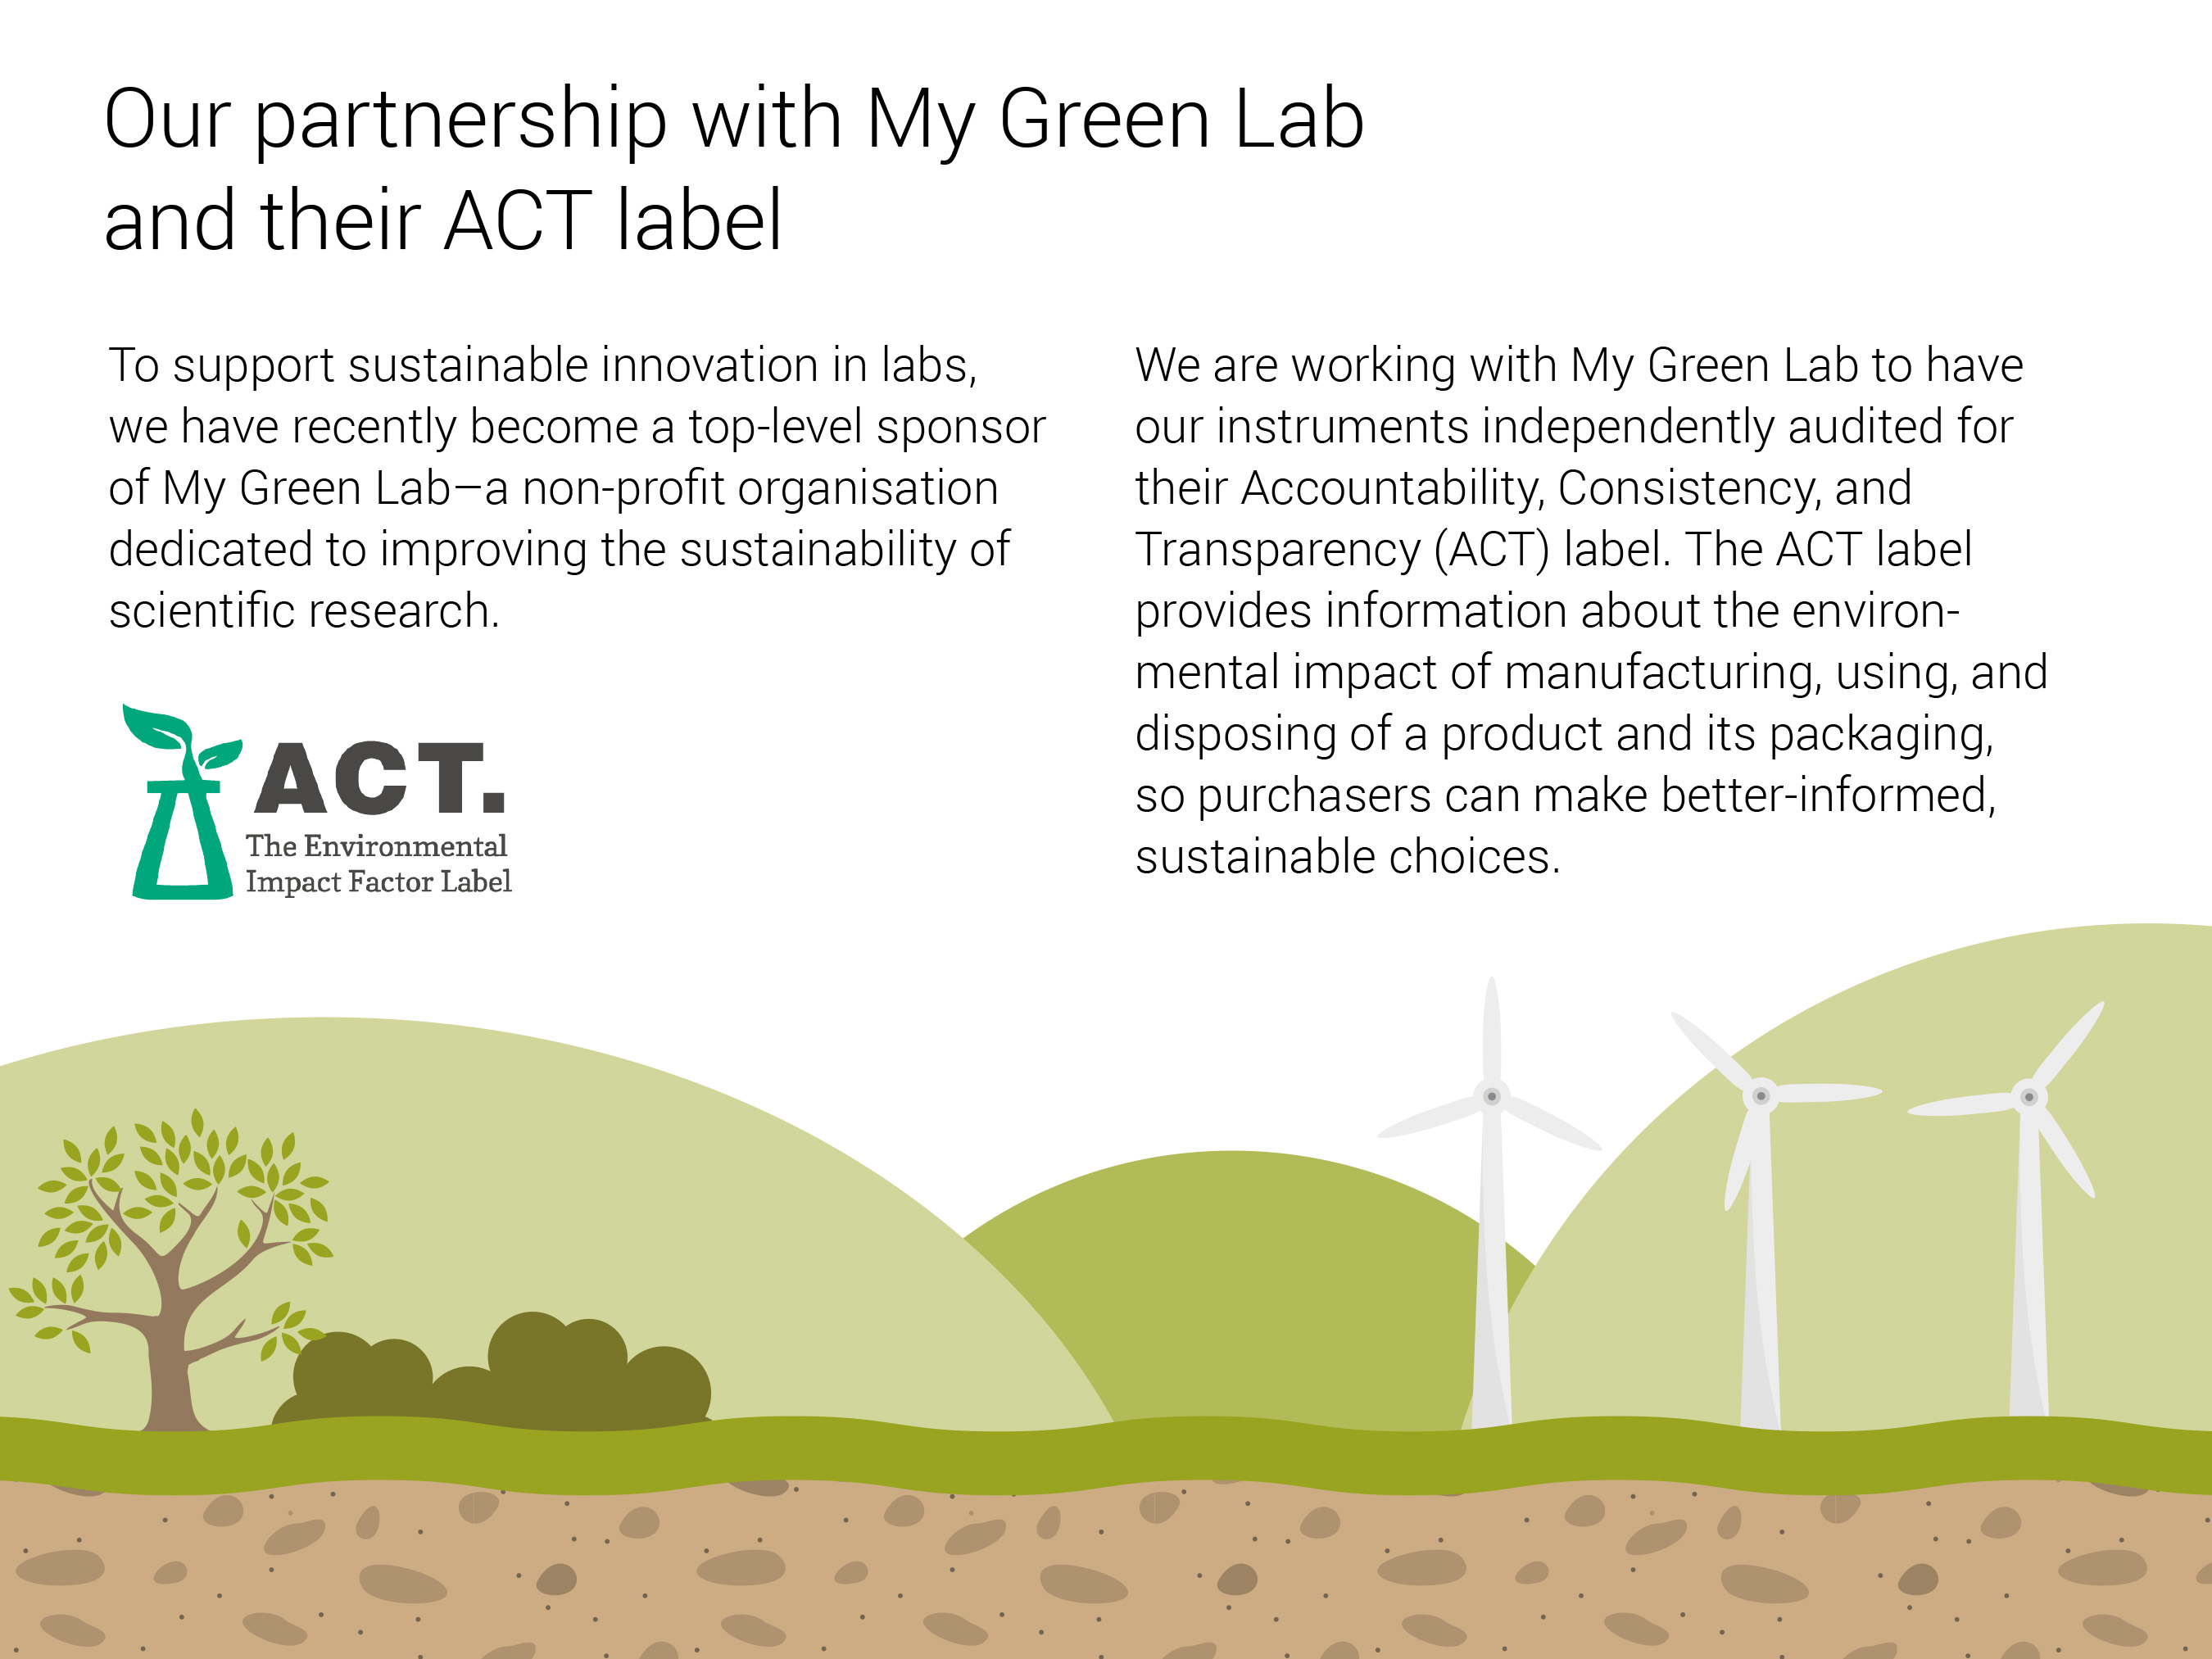 Click here to learn more https://act.mygreenlab.org/